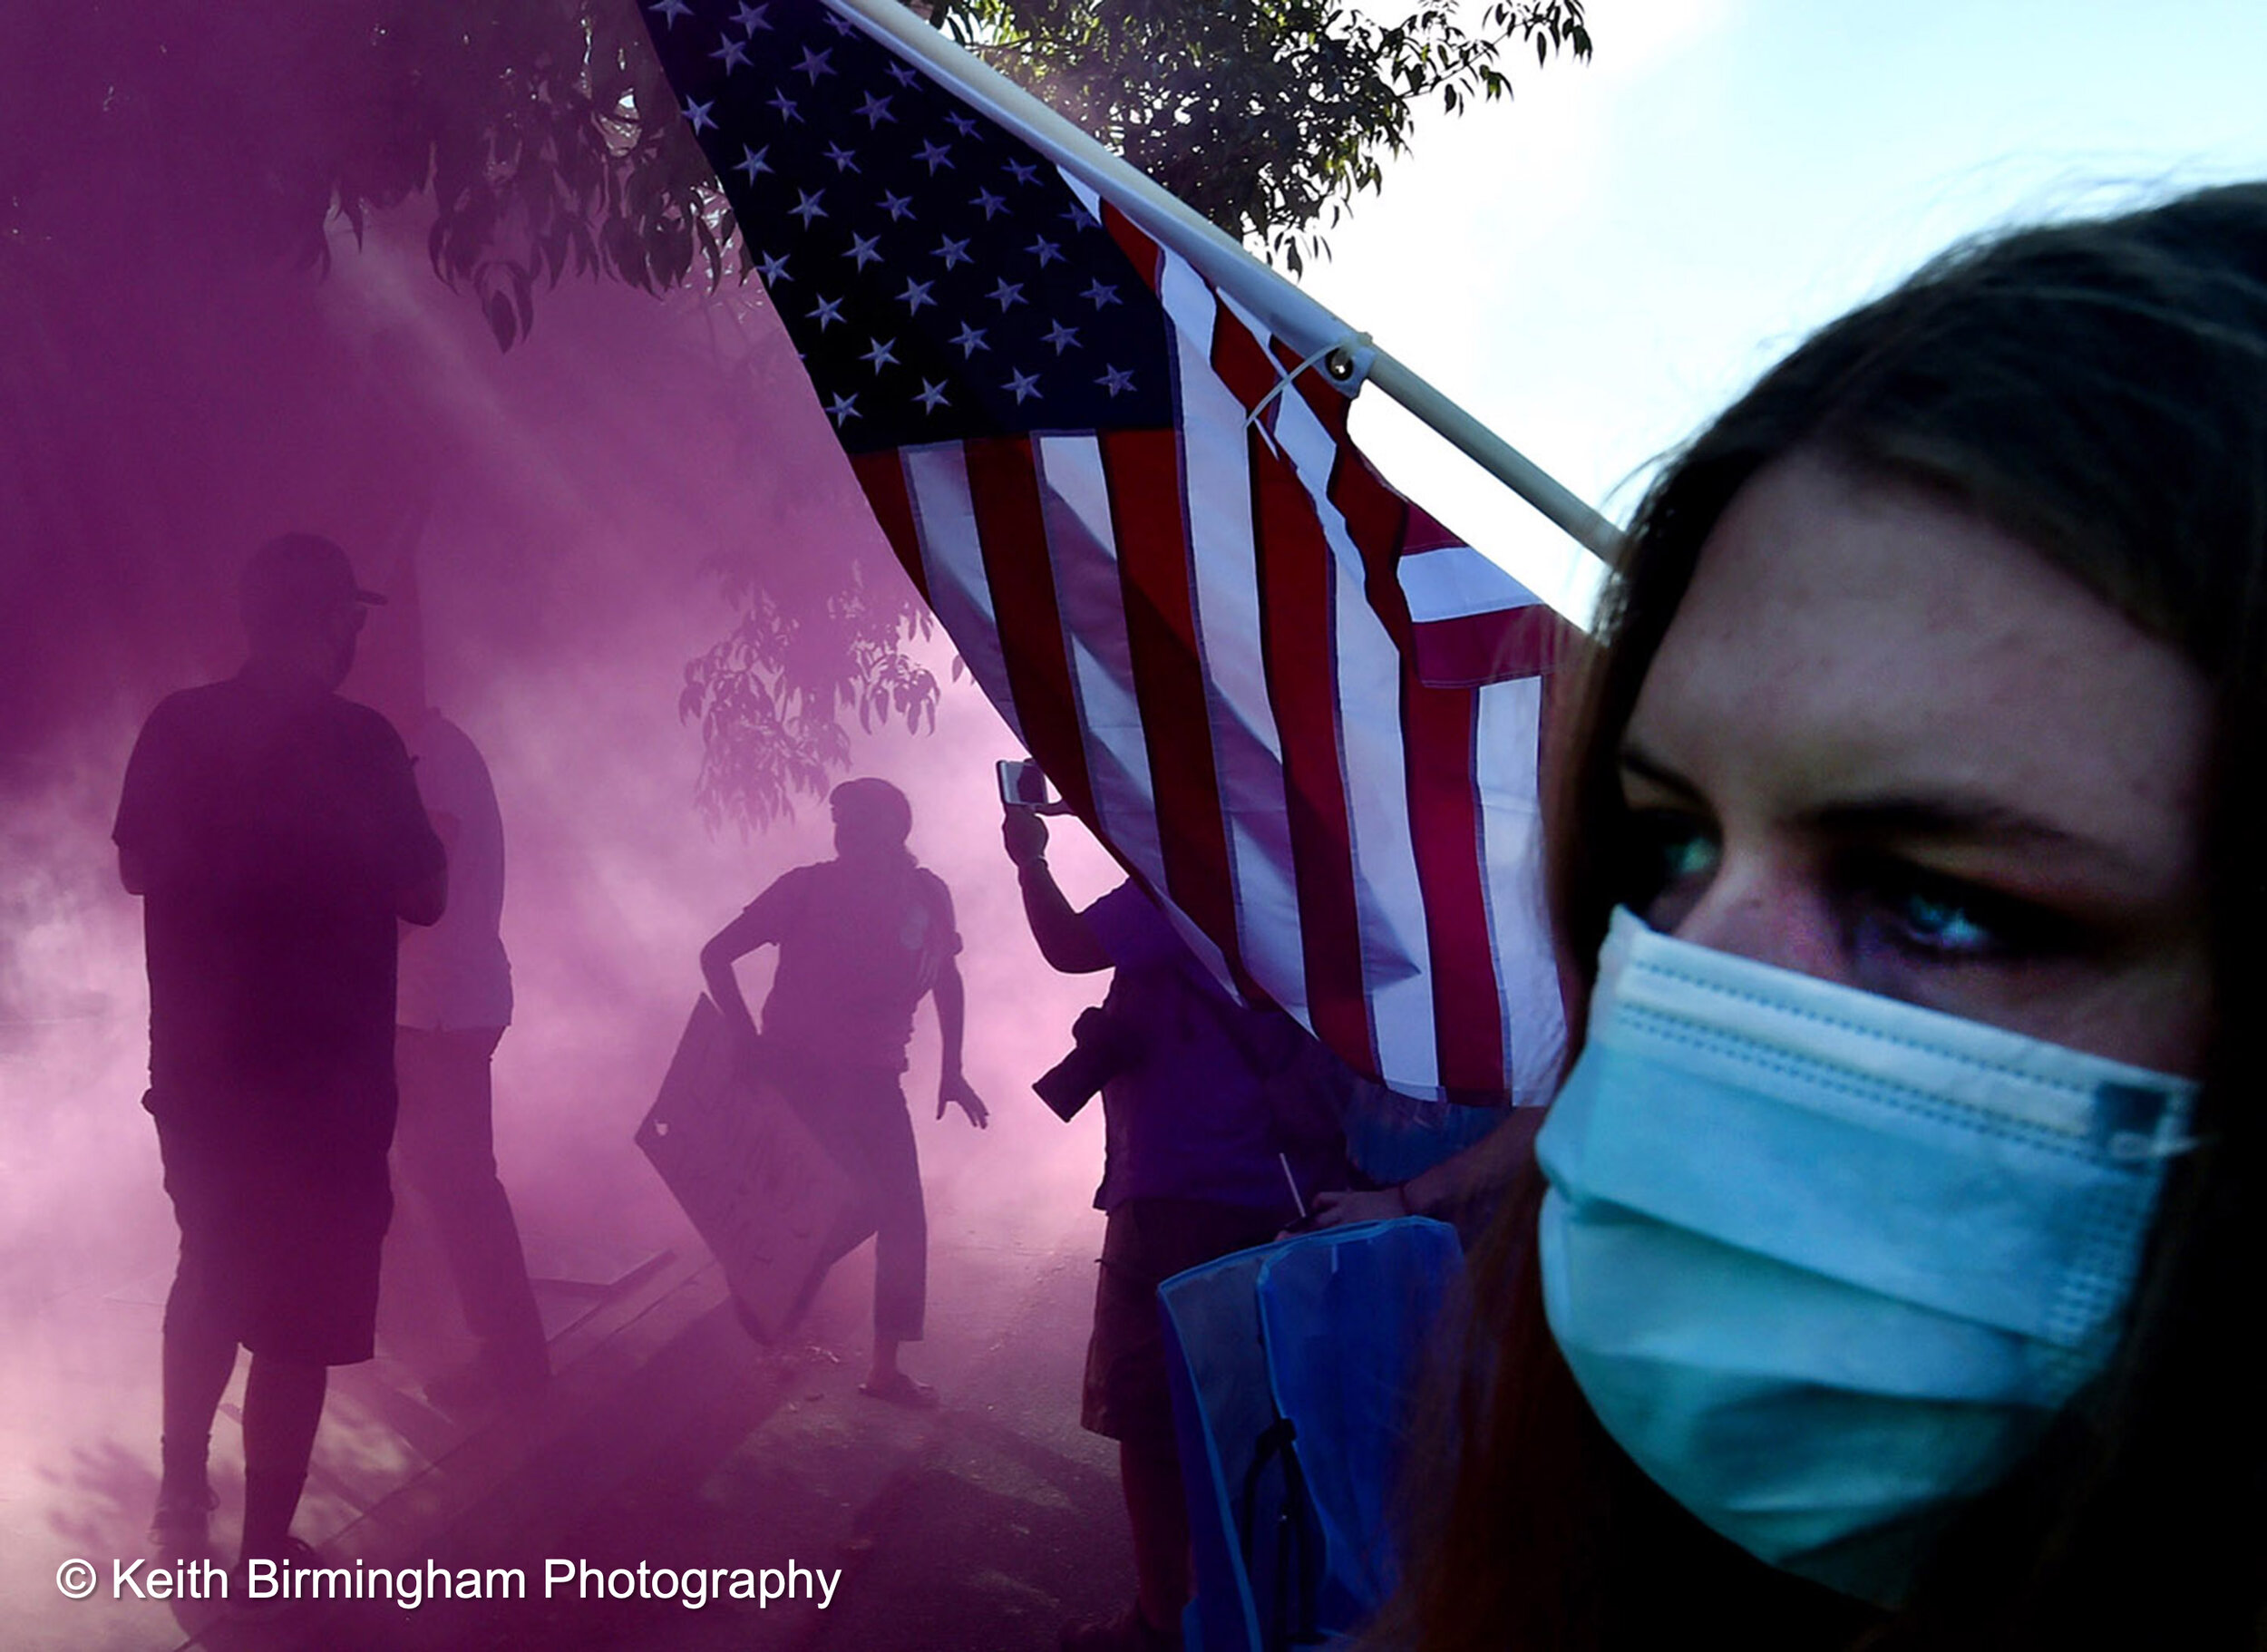  Colored smoke bombs fill the air as Pro Trump supporters clash with Black Lives Matter protestors during a rally along Foothill Blvd between the Albertsons and In-N-Out Burger in Tujunga, California on Friday, August 14, 2020. (Photo by Keith Birmin